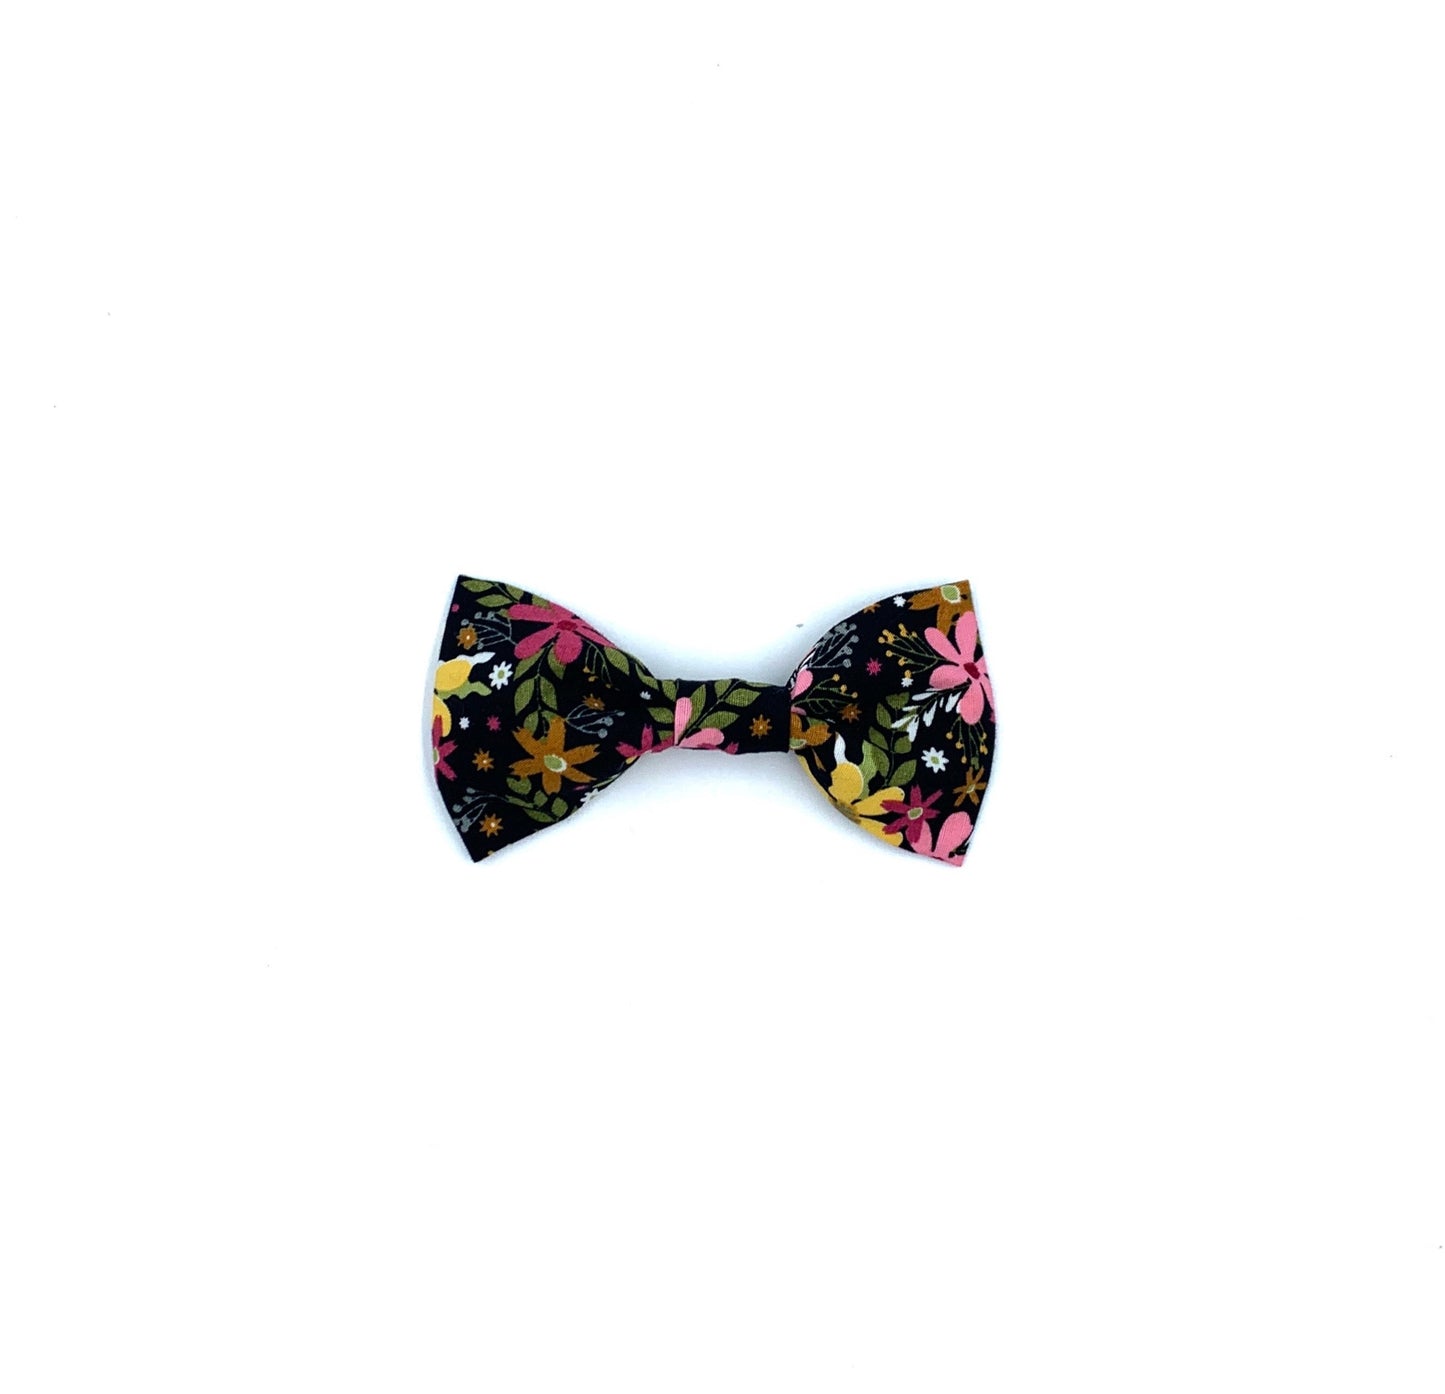 New Black Ditsy Floral Print Dog Bow